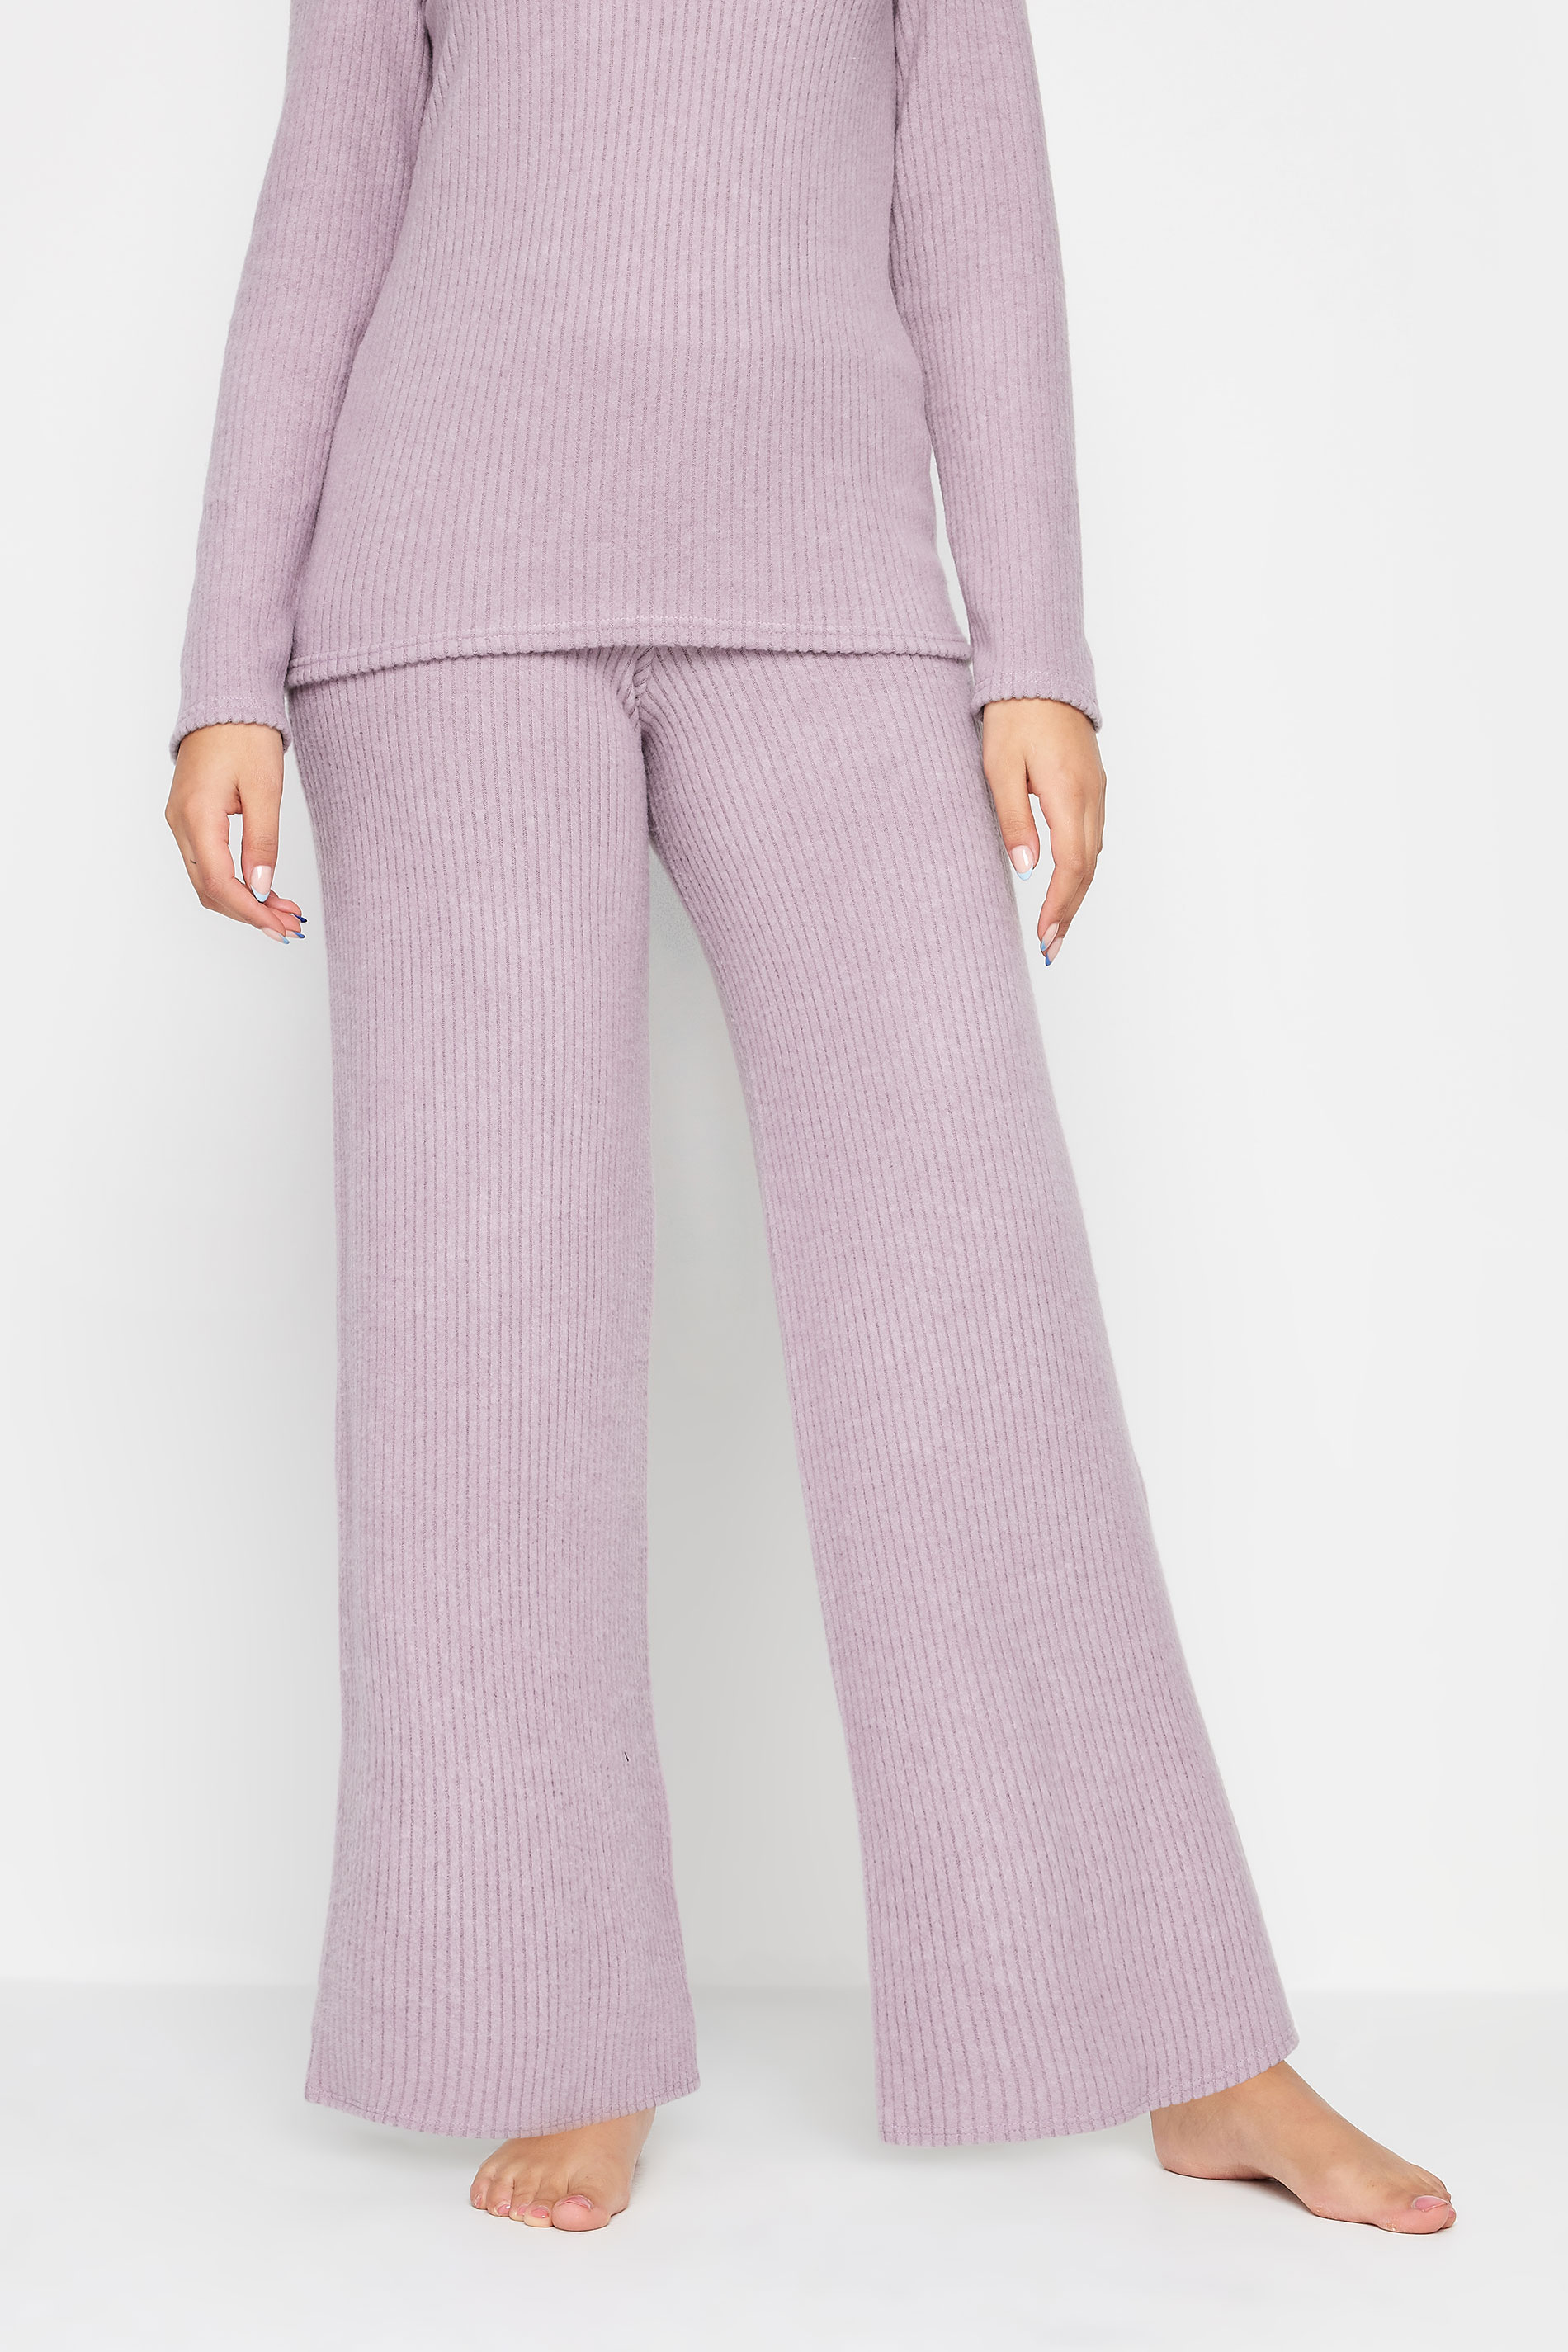 LTS Tall Blush Pink Ribbed Wide Leg Knitted Trousers | Long Tall Sally  1